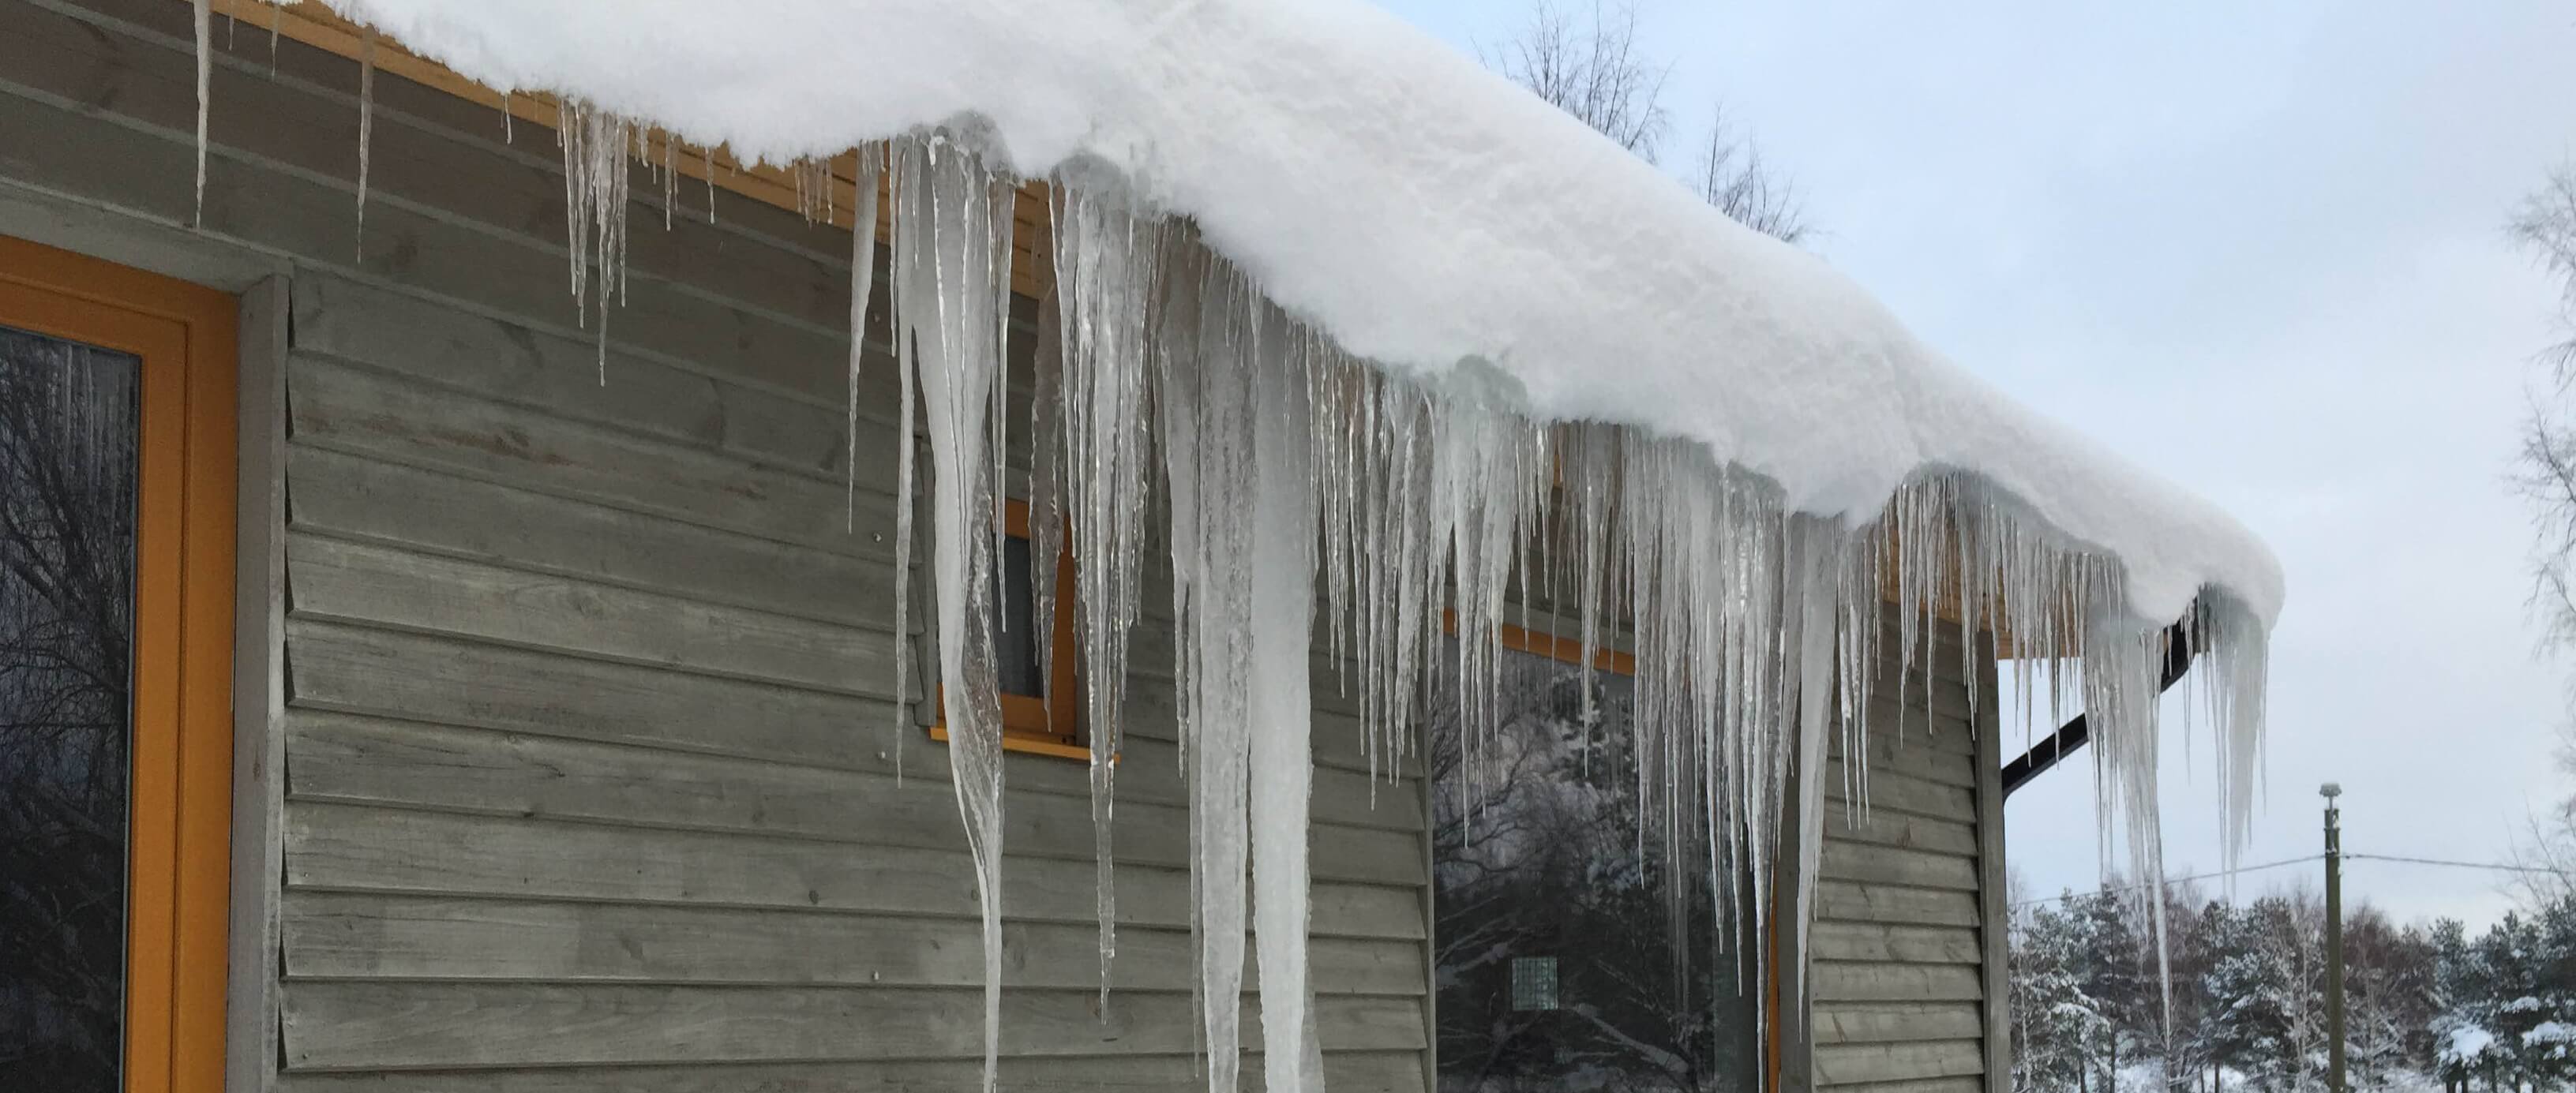 Removing icicles, snow, and ice from pitched and flat roofs